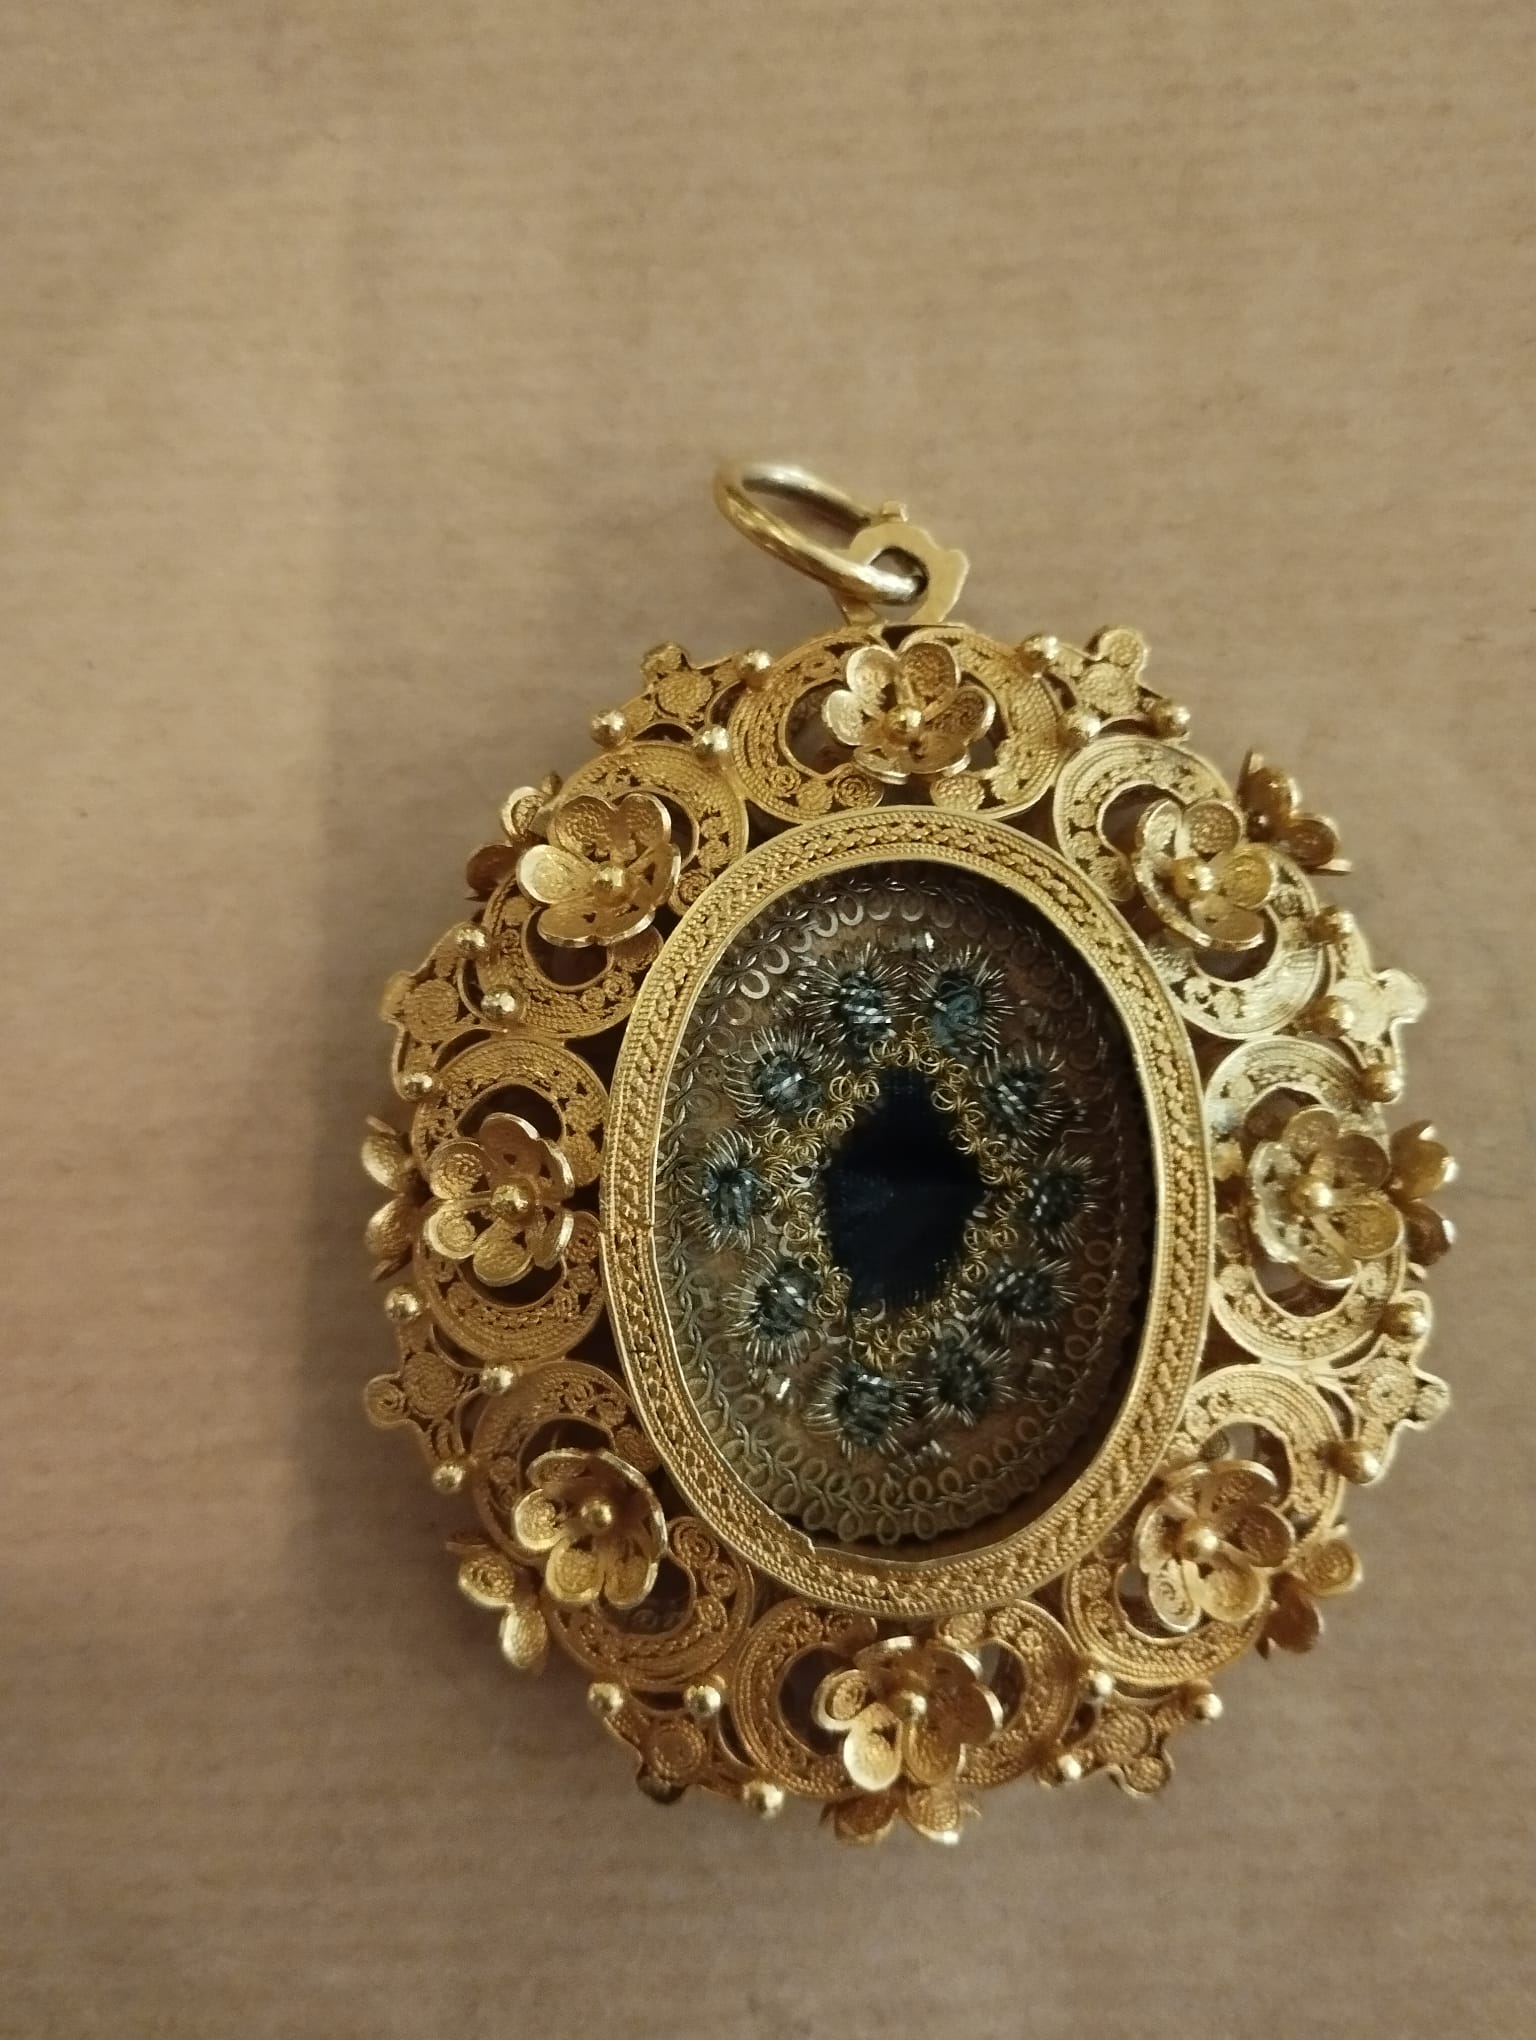 Important Reliquary Medallion in 20k or 22k gold filigree with relics of Saint Ignatius of Loyola, f - Image 2 of 2